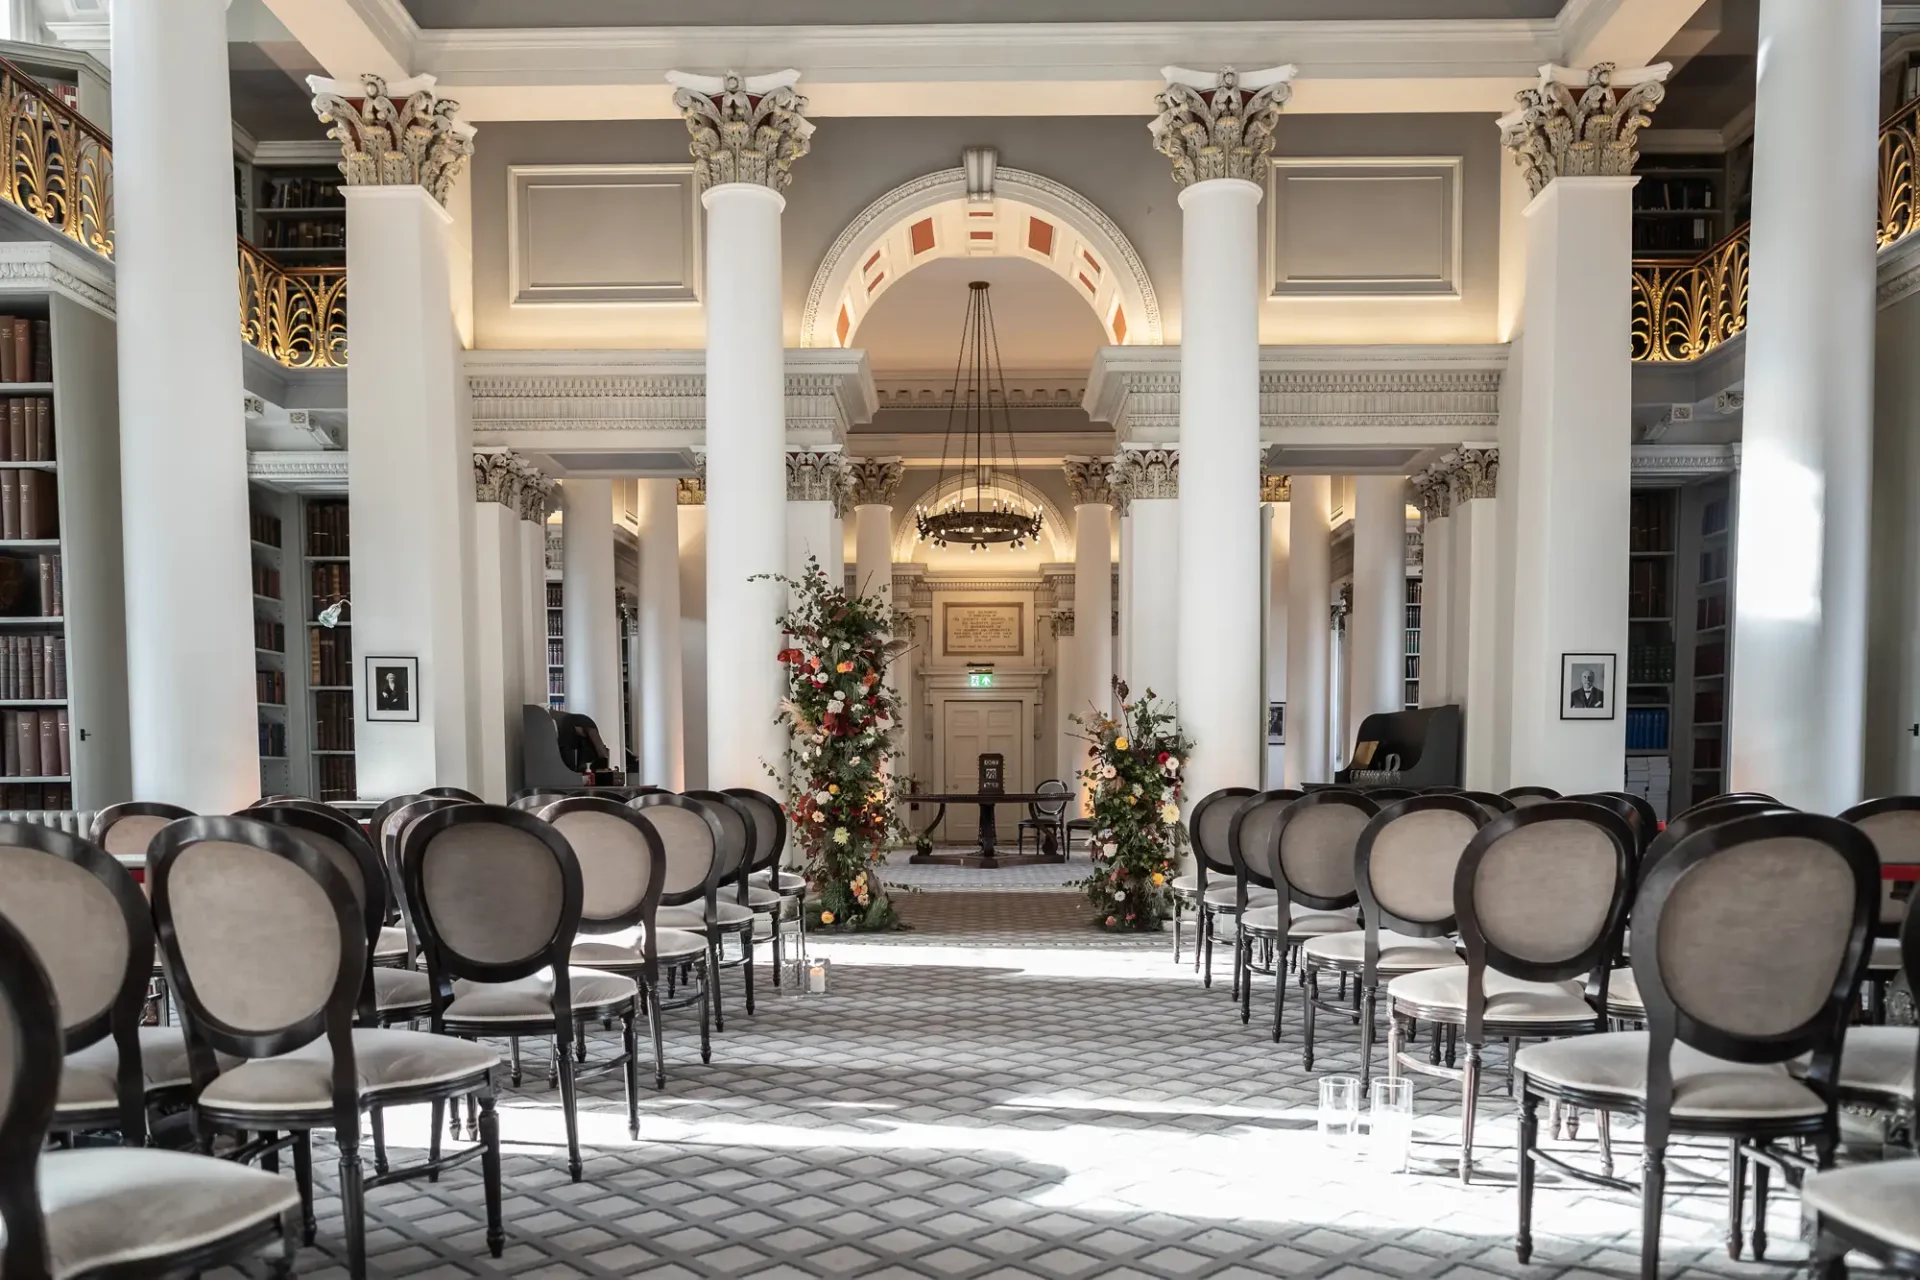 Elegant hall arranged for a wedding with rows of chairs and floral decorations, featuring classical architecture and large windows.